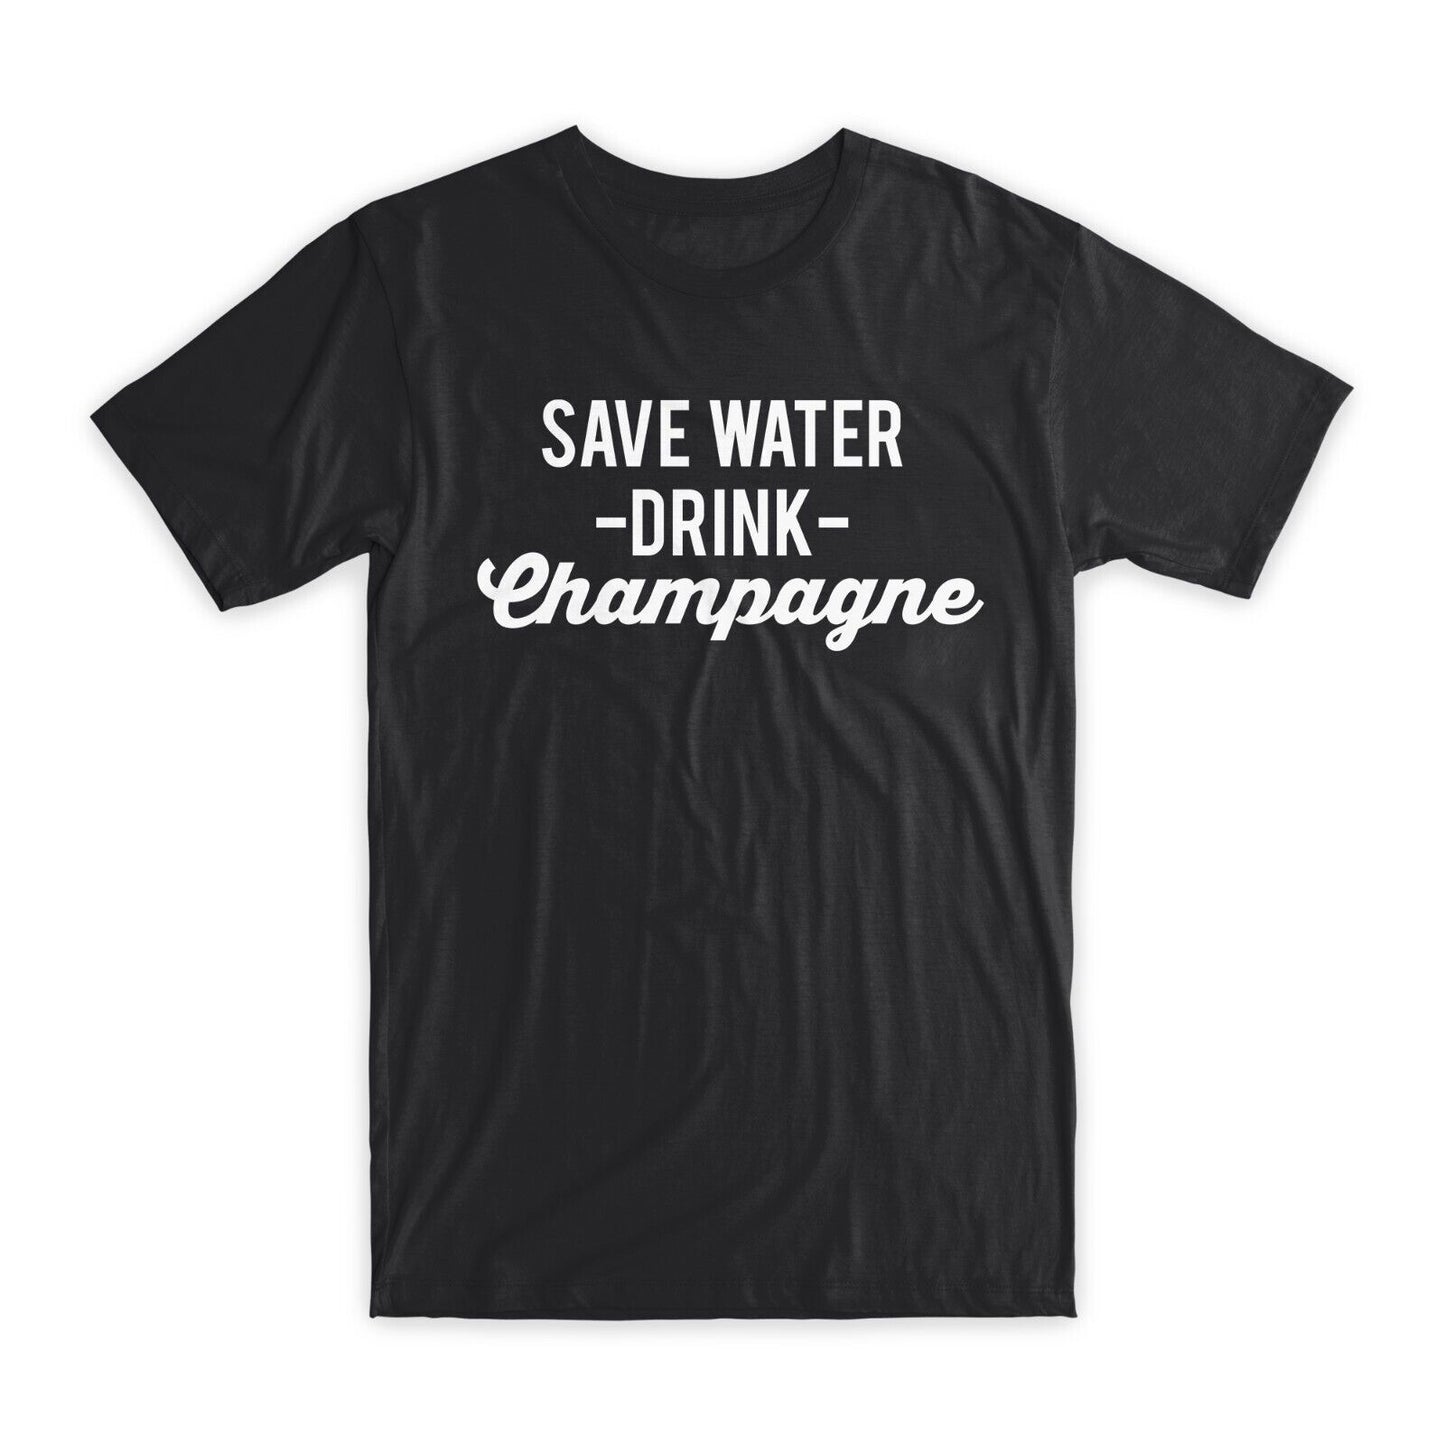 Save Water Drink Champagne T-Shirt Premium Cotton Crew Neck Funny Tees Gifts NEW